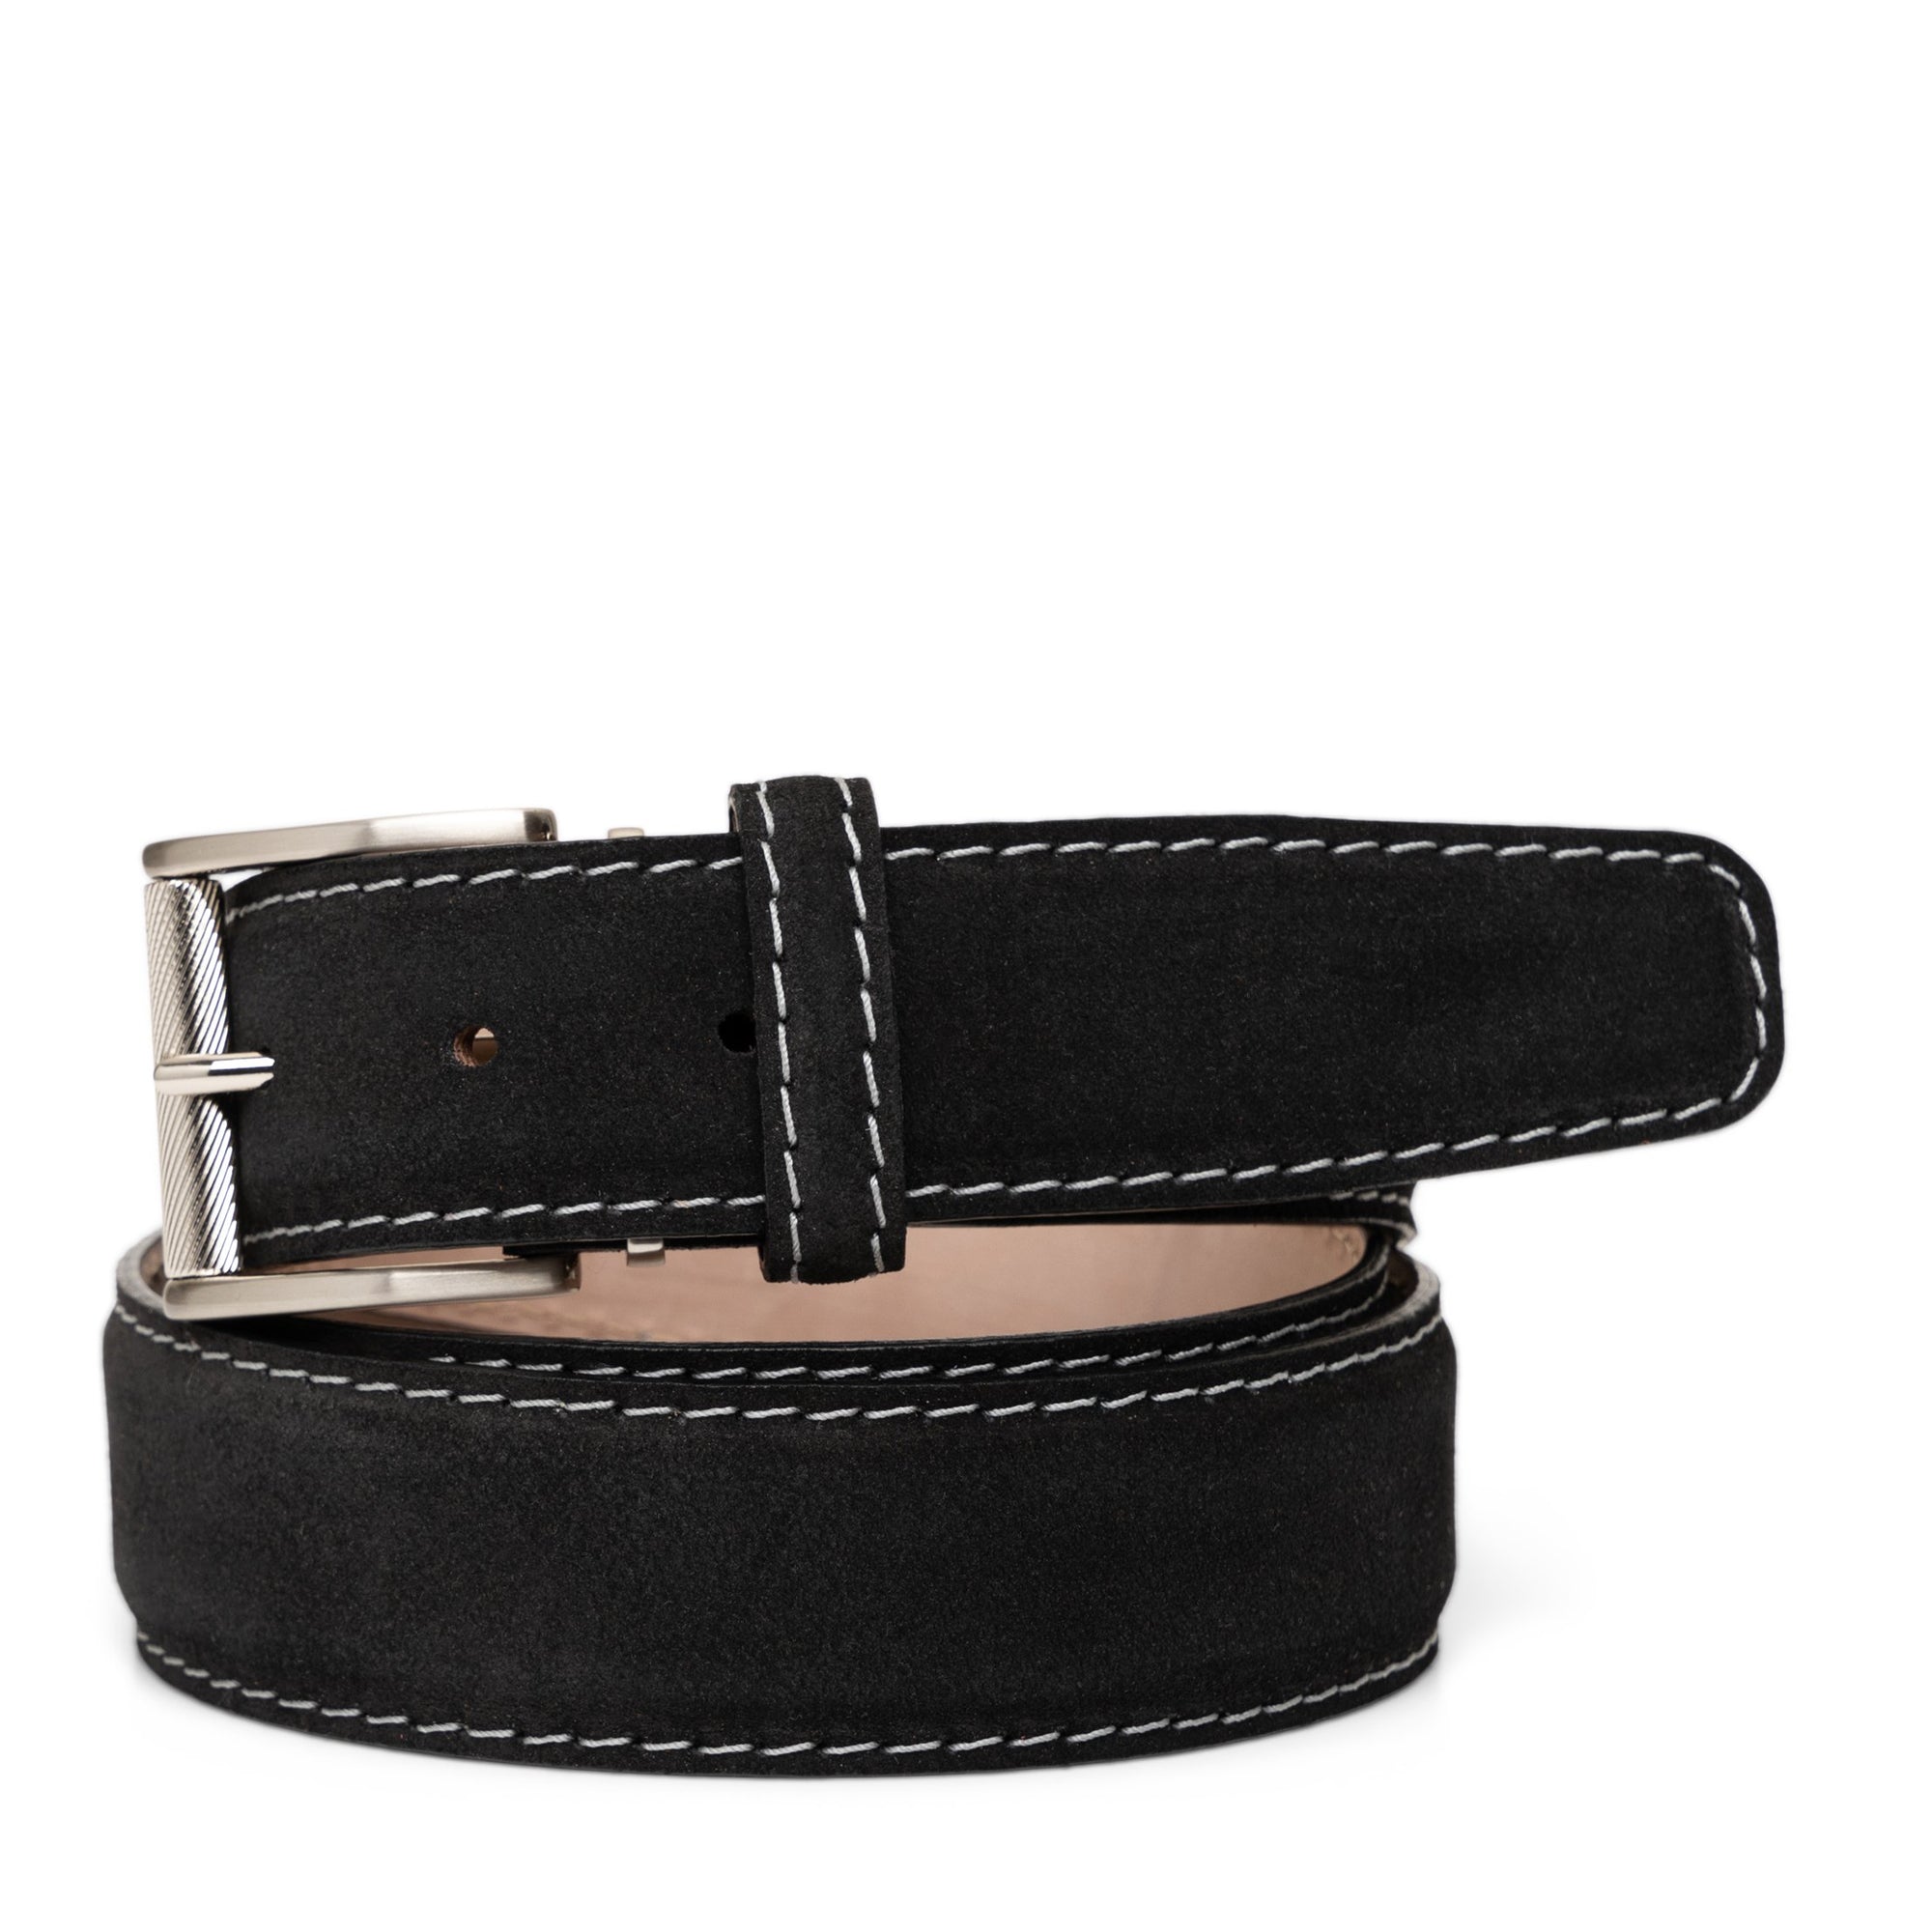 Italian Suede Belt in Black with Grey Stitching by L.E.N. Bespoke